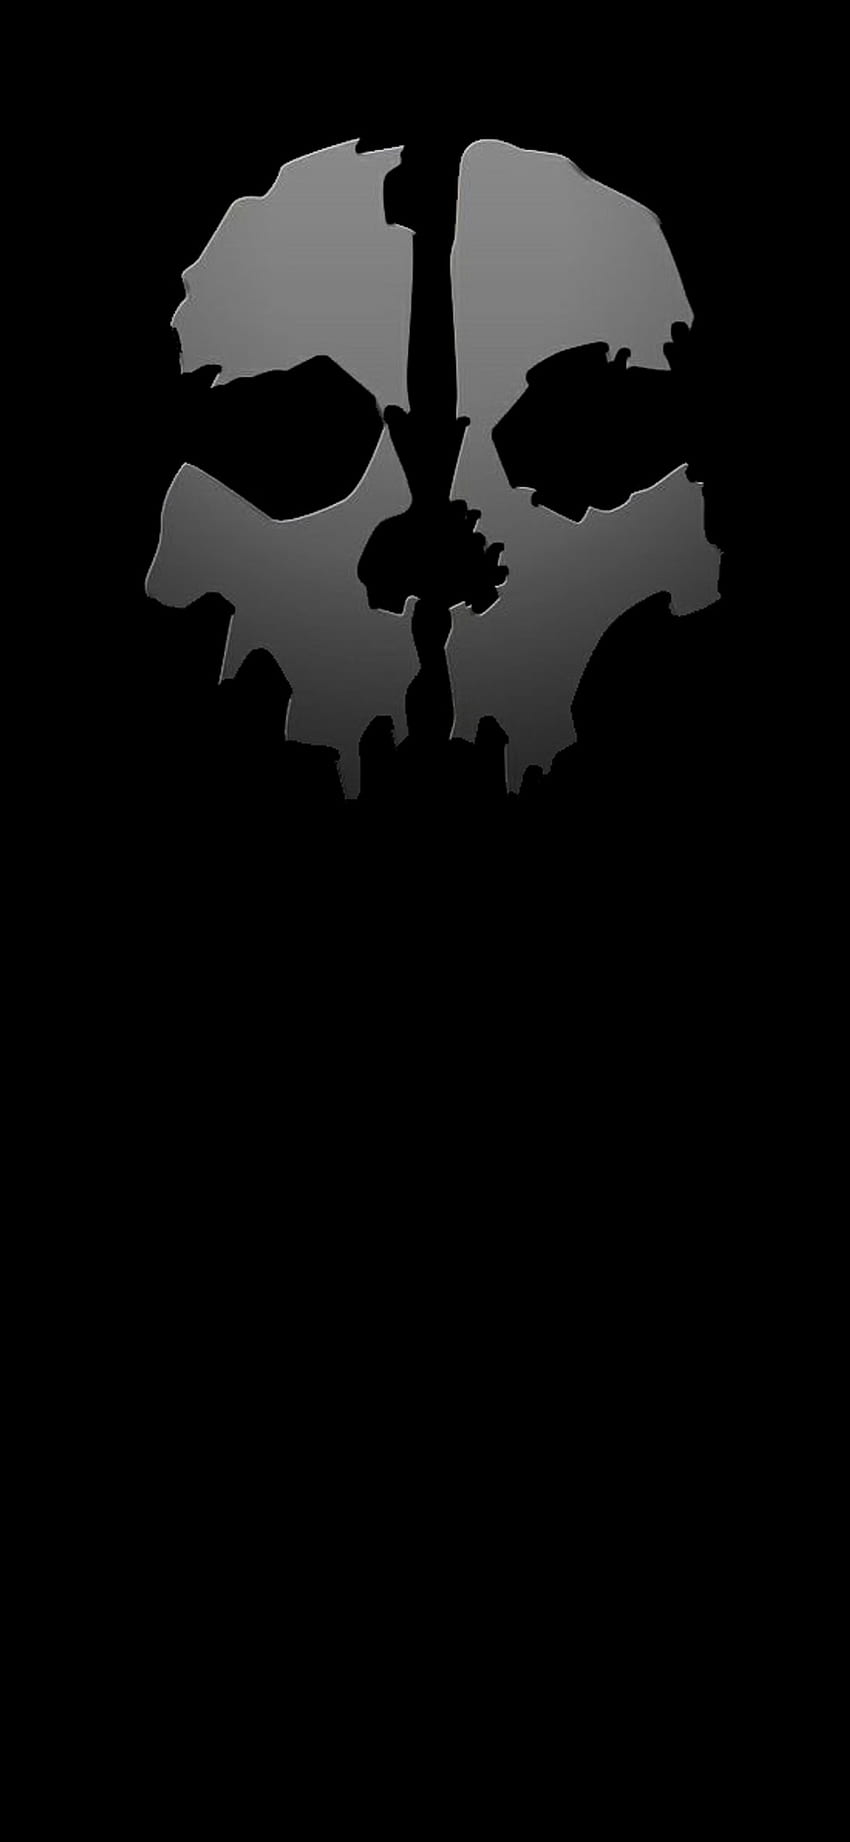 SHADOWS GHOST, COD MOBILE, AMOLED, SHADOW, COD, OLED, BLACK, CALL OF DUTY,  WP, CALL OF DUTY MOBILE HD phone wallpaper | Pxfuel